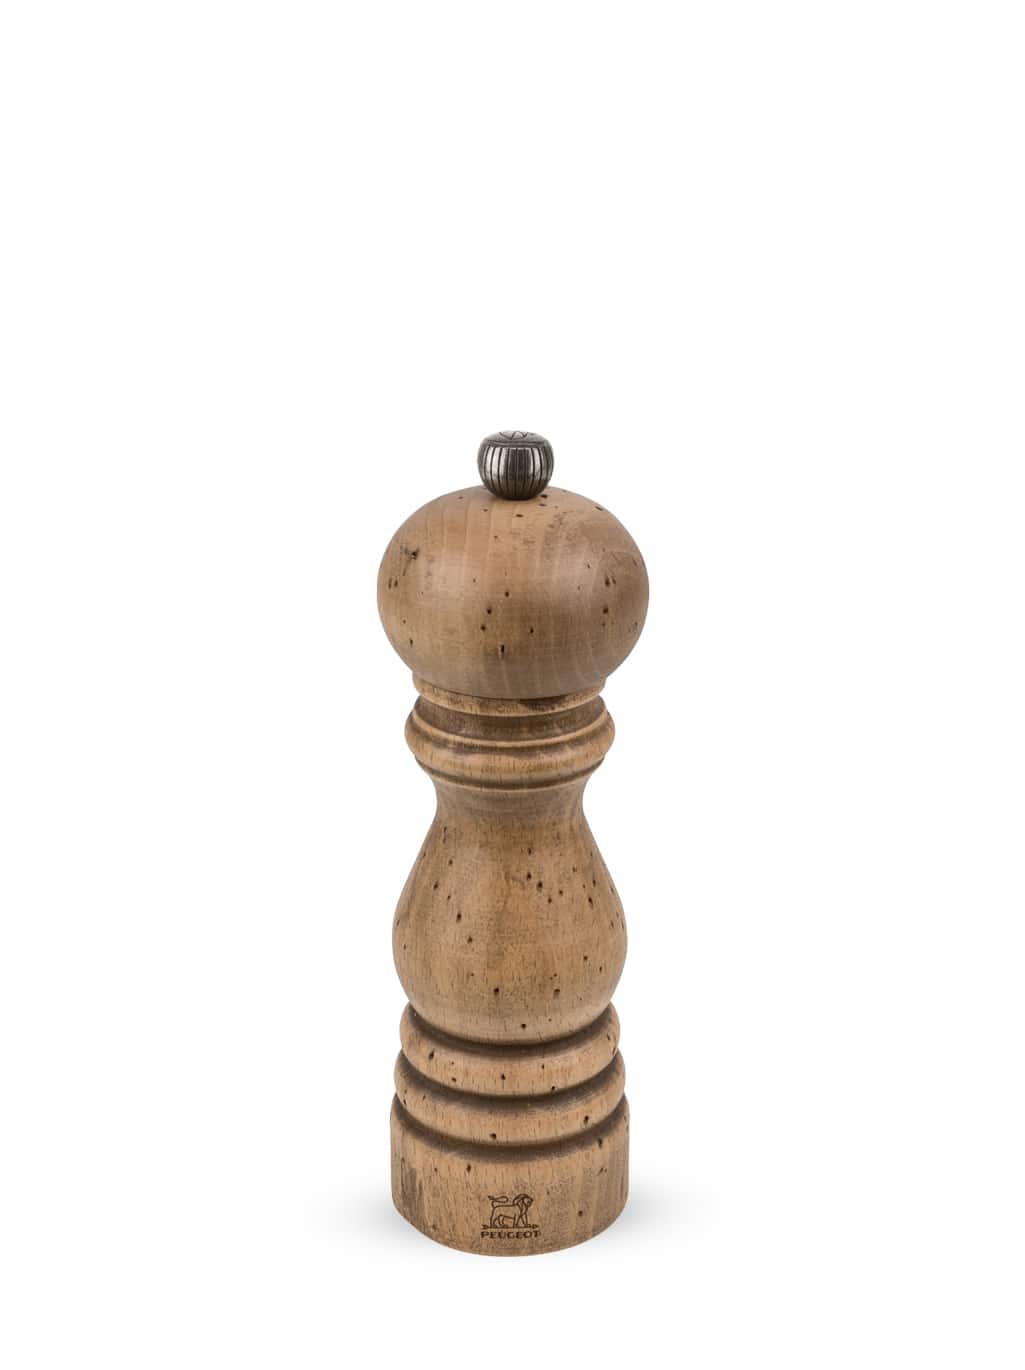 Paris antique Manual pepper mill, beech wood with antique finish